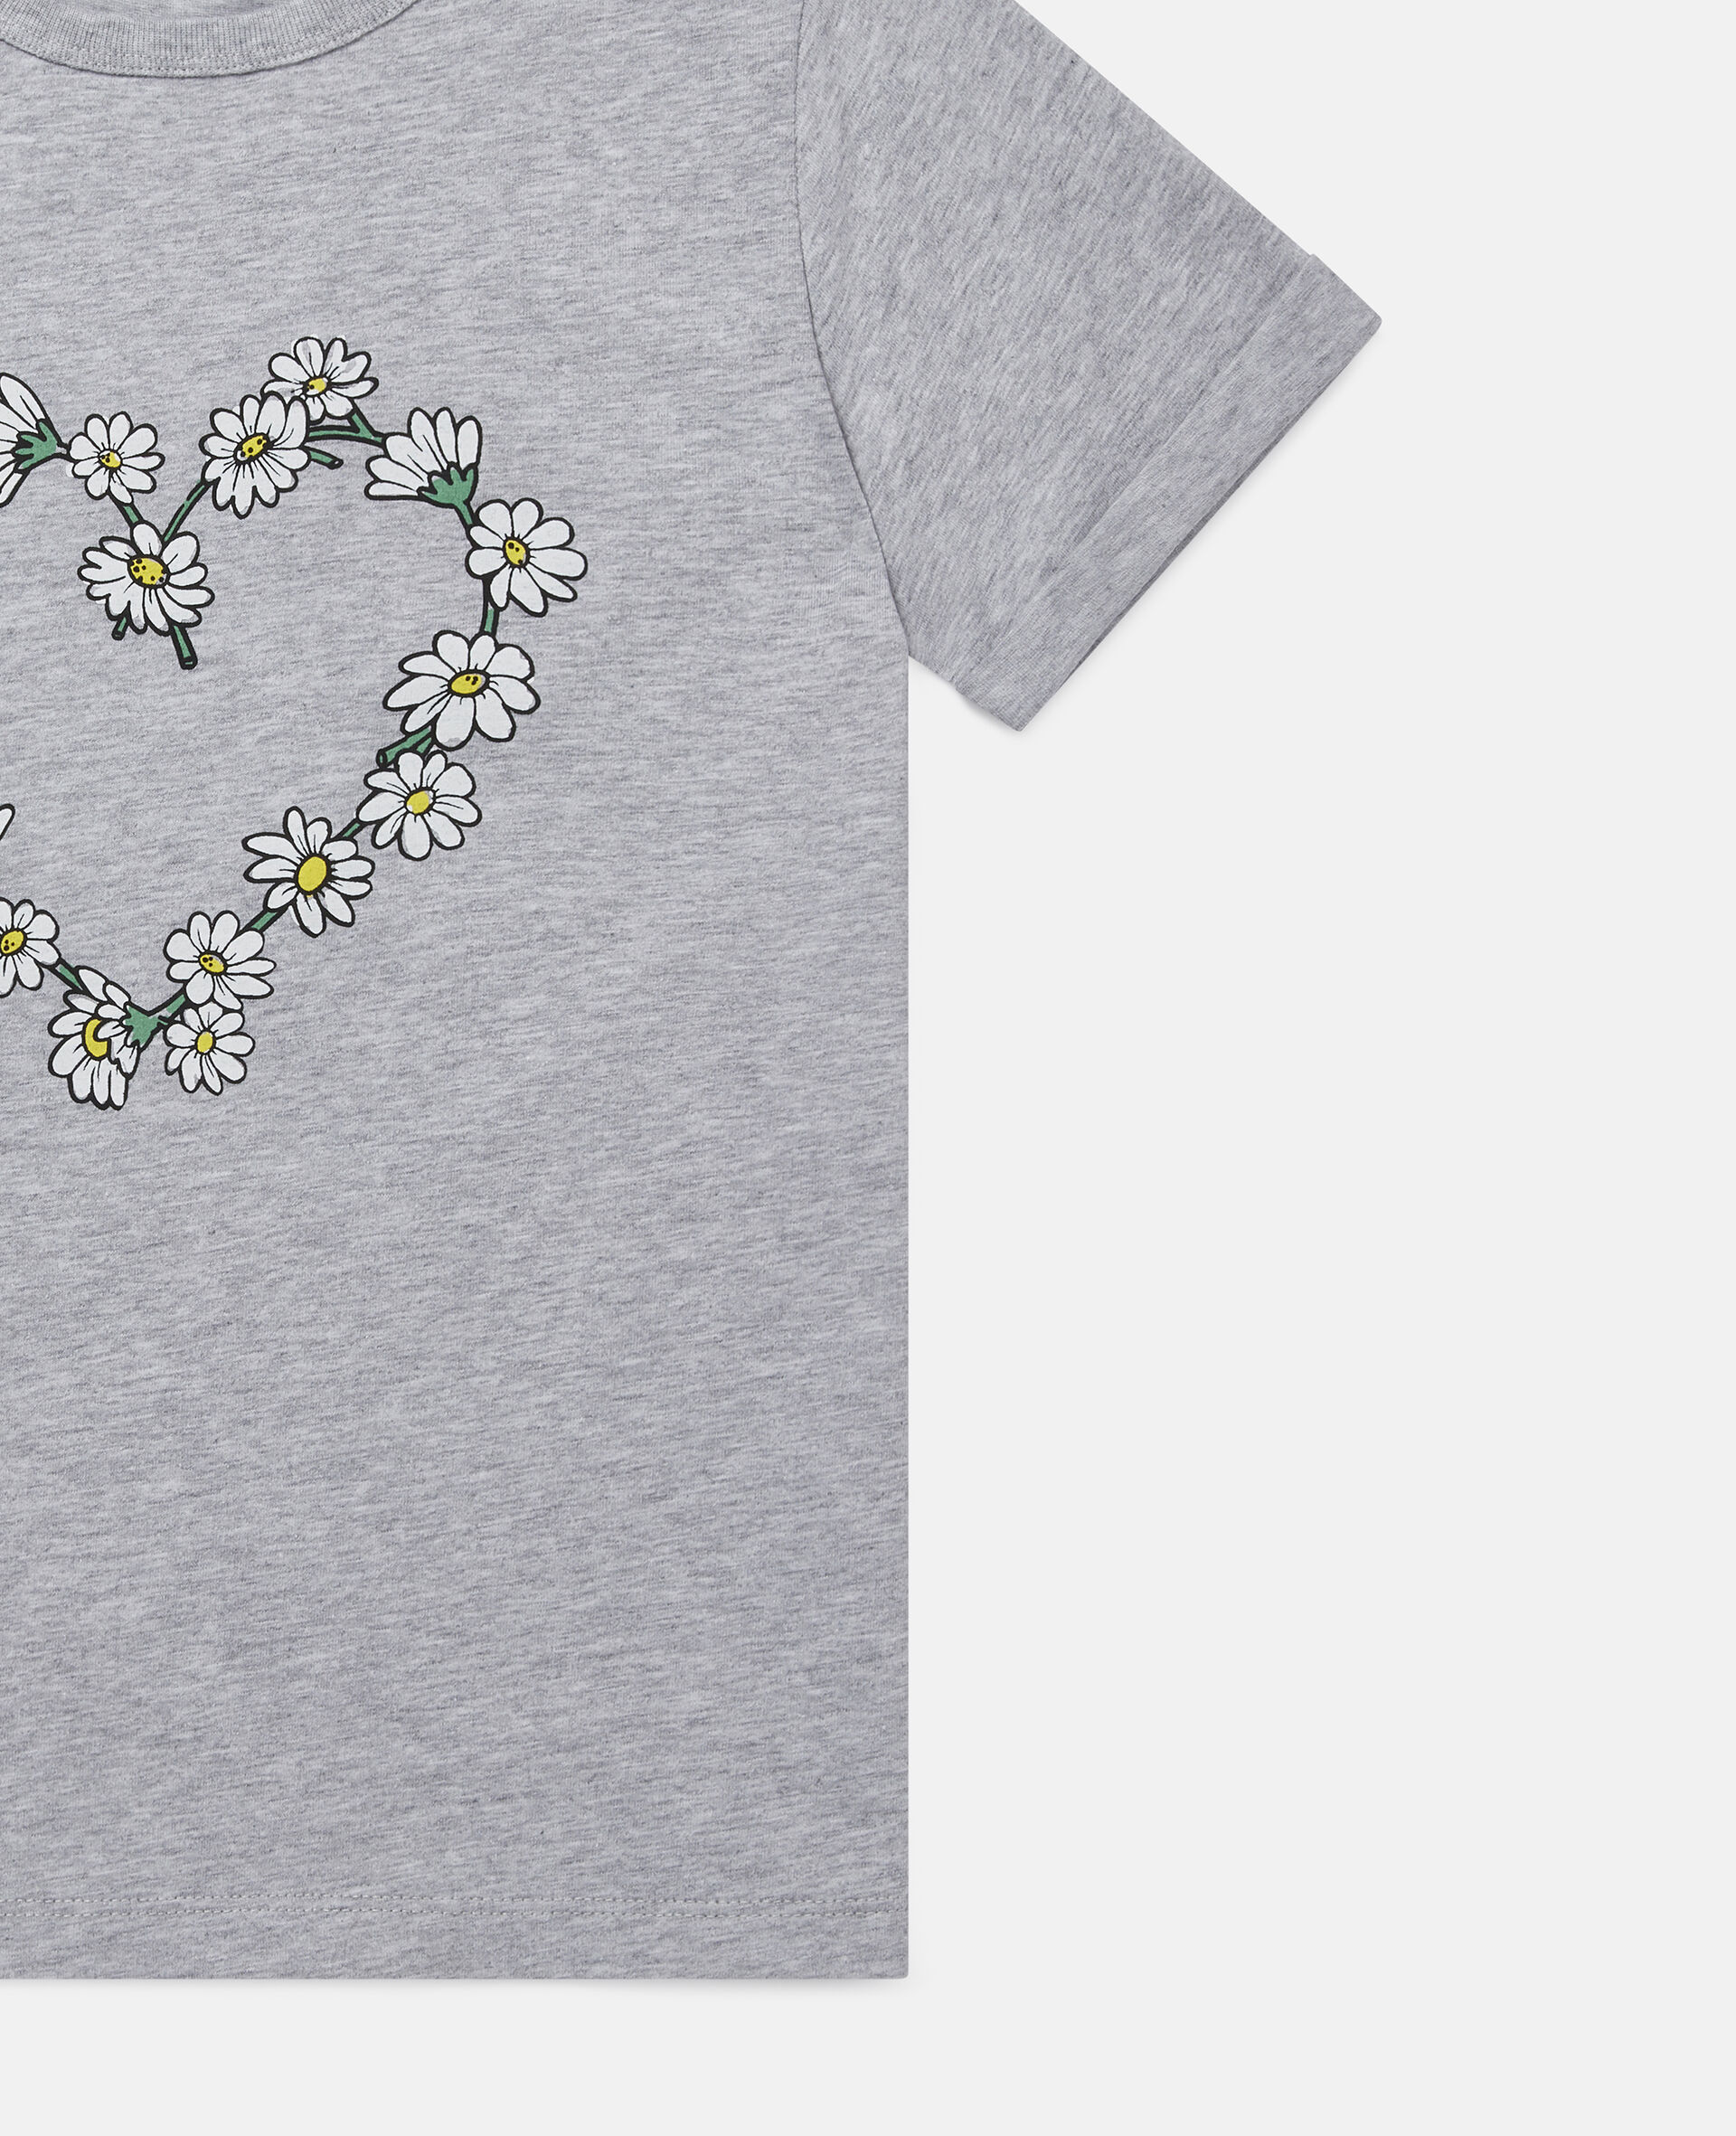 Daisy Heart Cotton T-Shirt-Grey-large image number 1